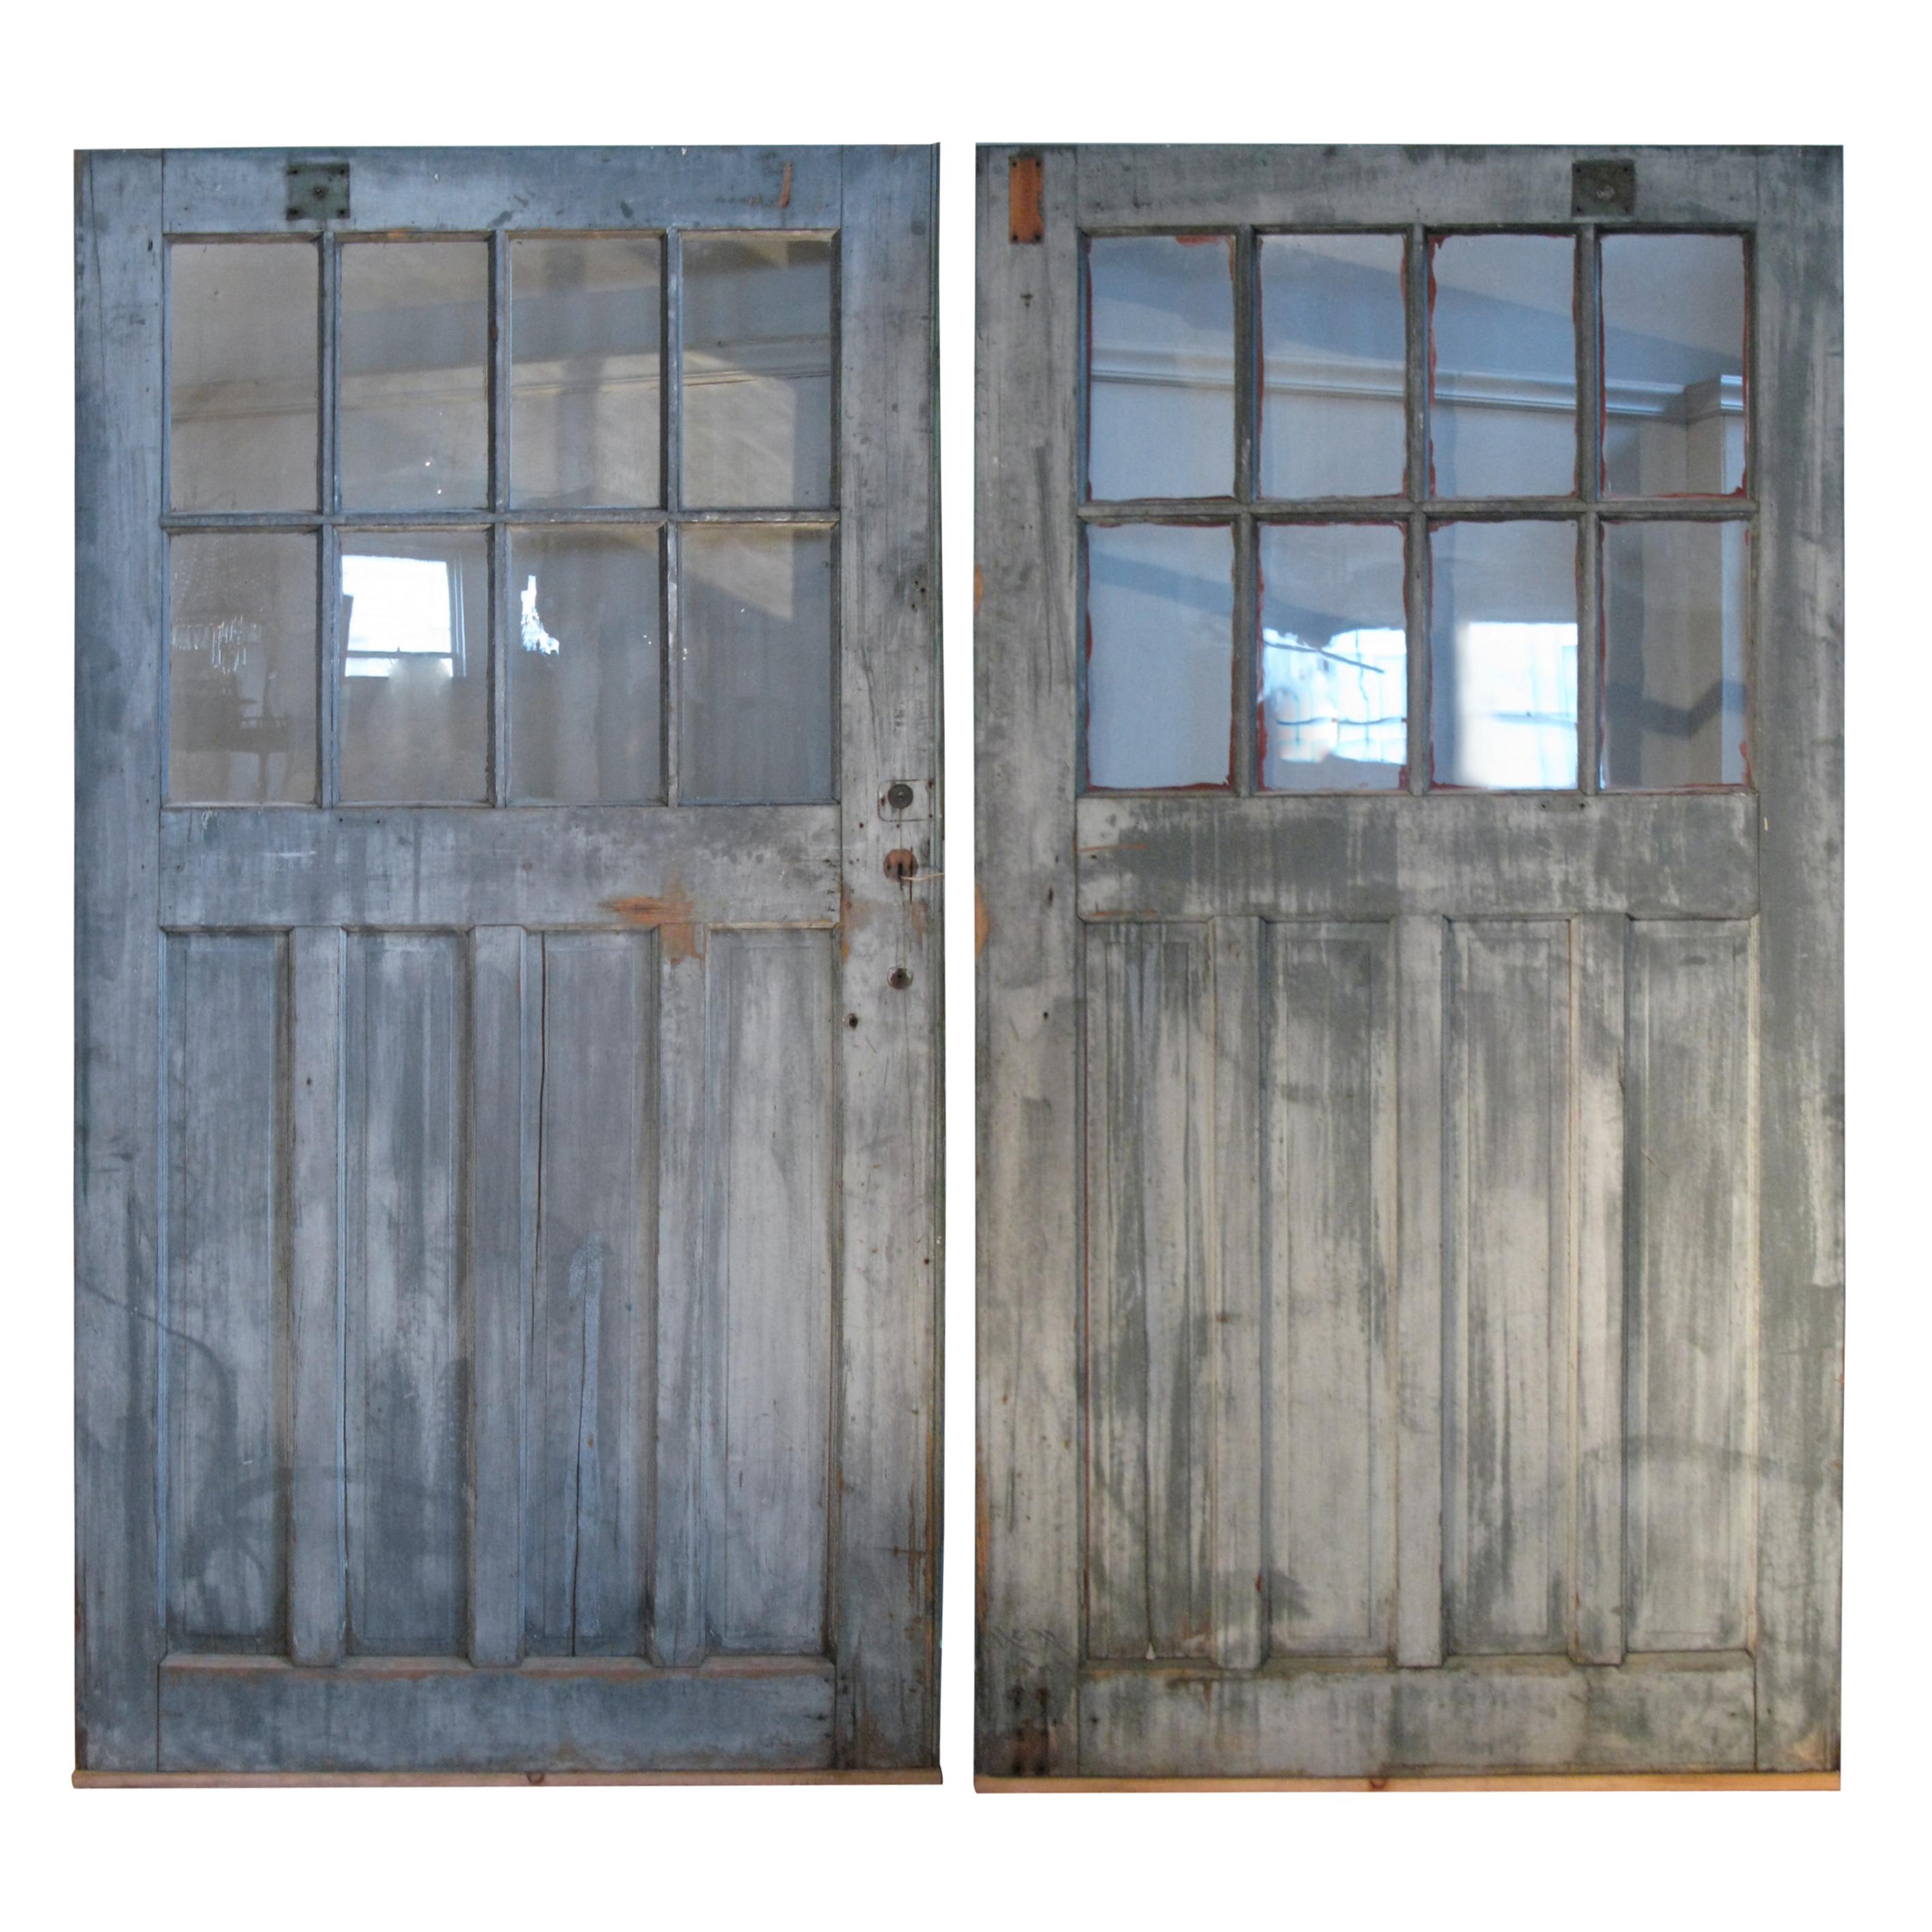 Pair of Antique Barn Doors with Divided Pane Windows